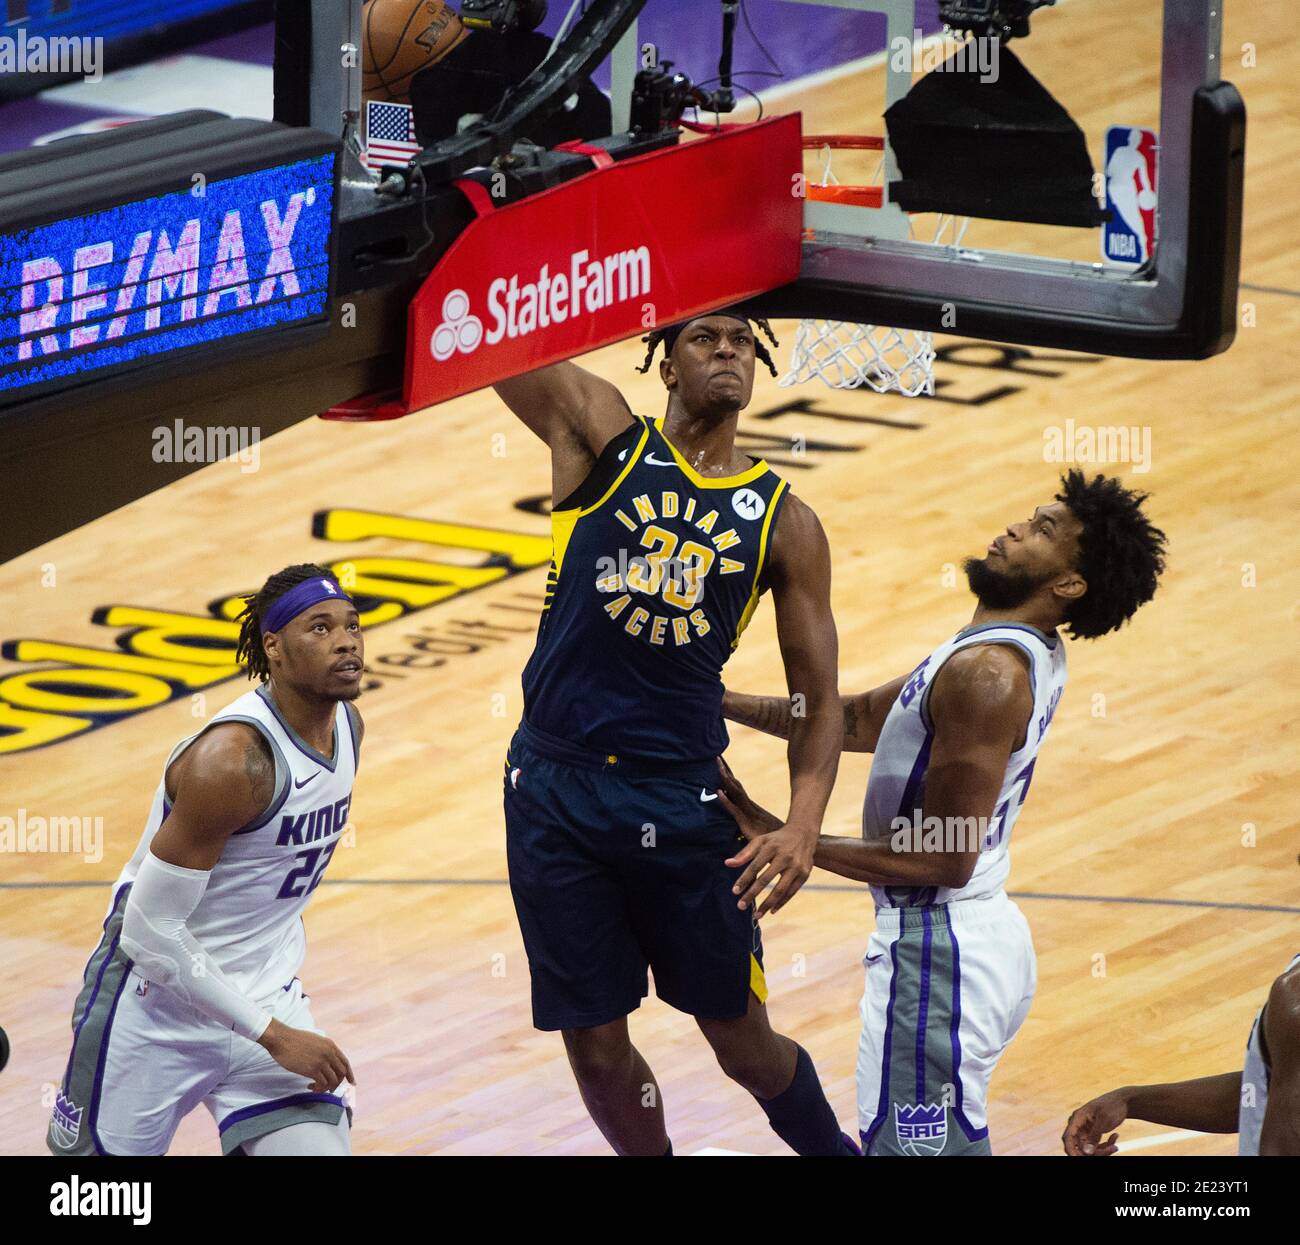 Sacramento, CA, USA. 11th Jan, 2021. Indiana Pacers center Myles Turner (33) shoots over Sacramento Kings forward Marvin Bagley III (35) and Sacramento Kings center Richaun Holmes (22) during a game at the Golden 1 Center on Monday, Jan 11, 2021 in Sacramento. Credit: Paul Kitagaki Jr./ZUMA Wire/Alamy Live News Stock Photo